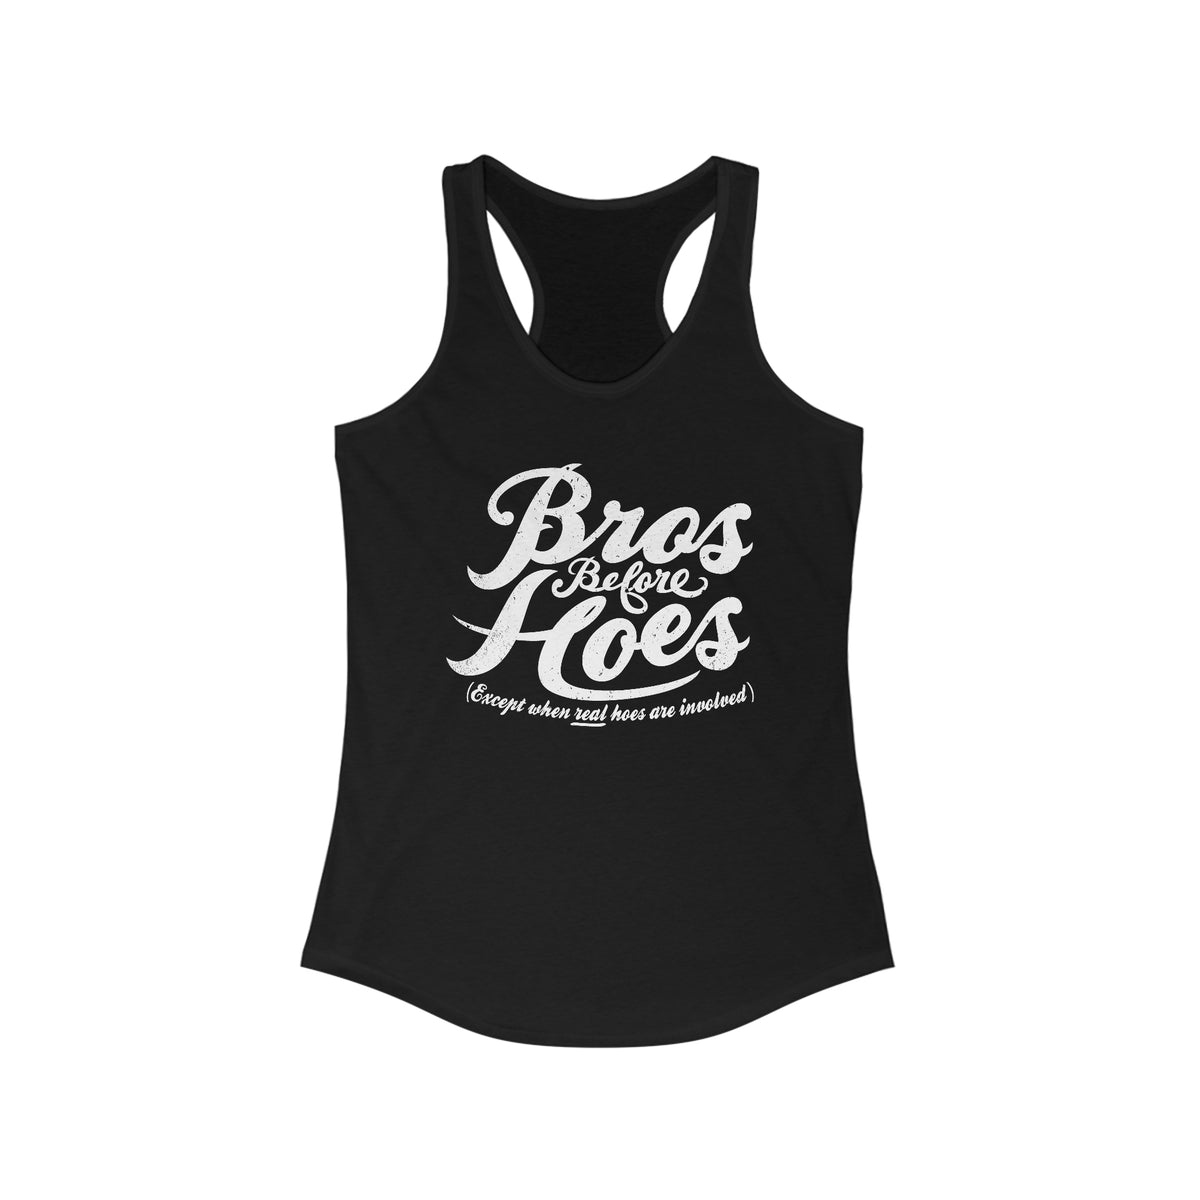 Bros Before Hoes (Except When Real Hoes Are Involved) - LADIES TANK